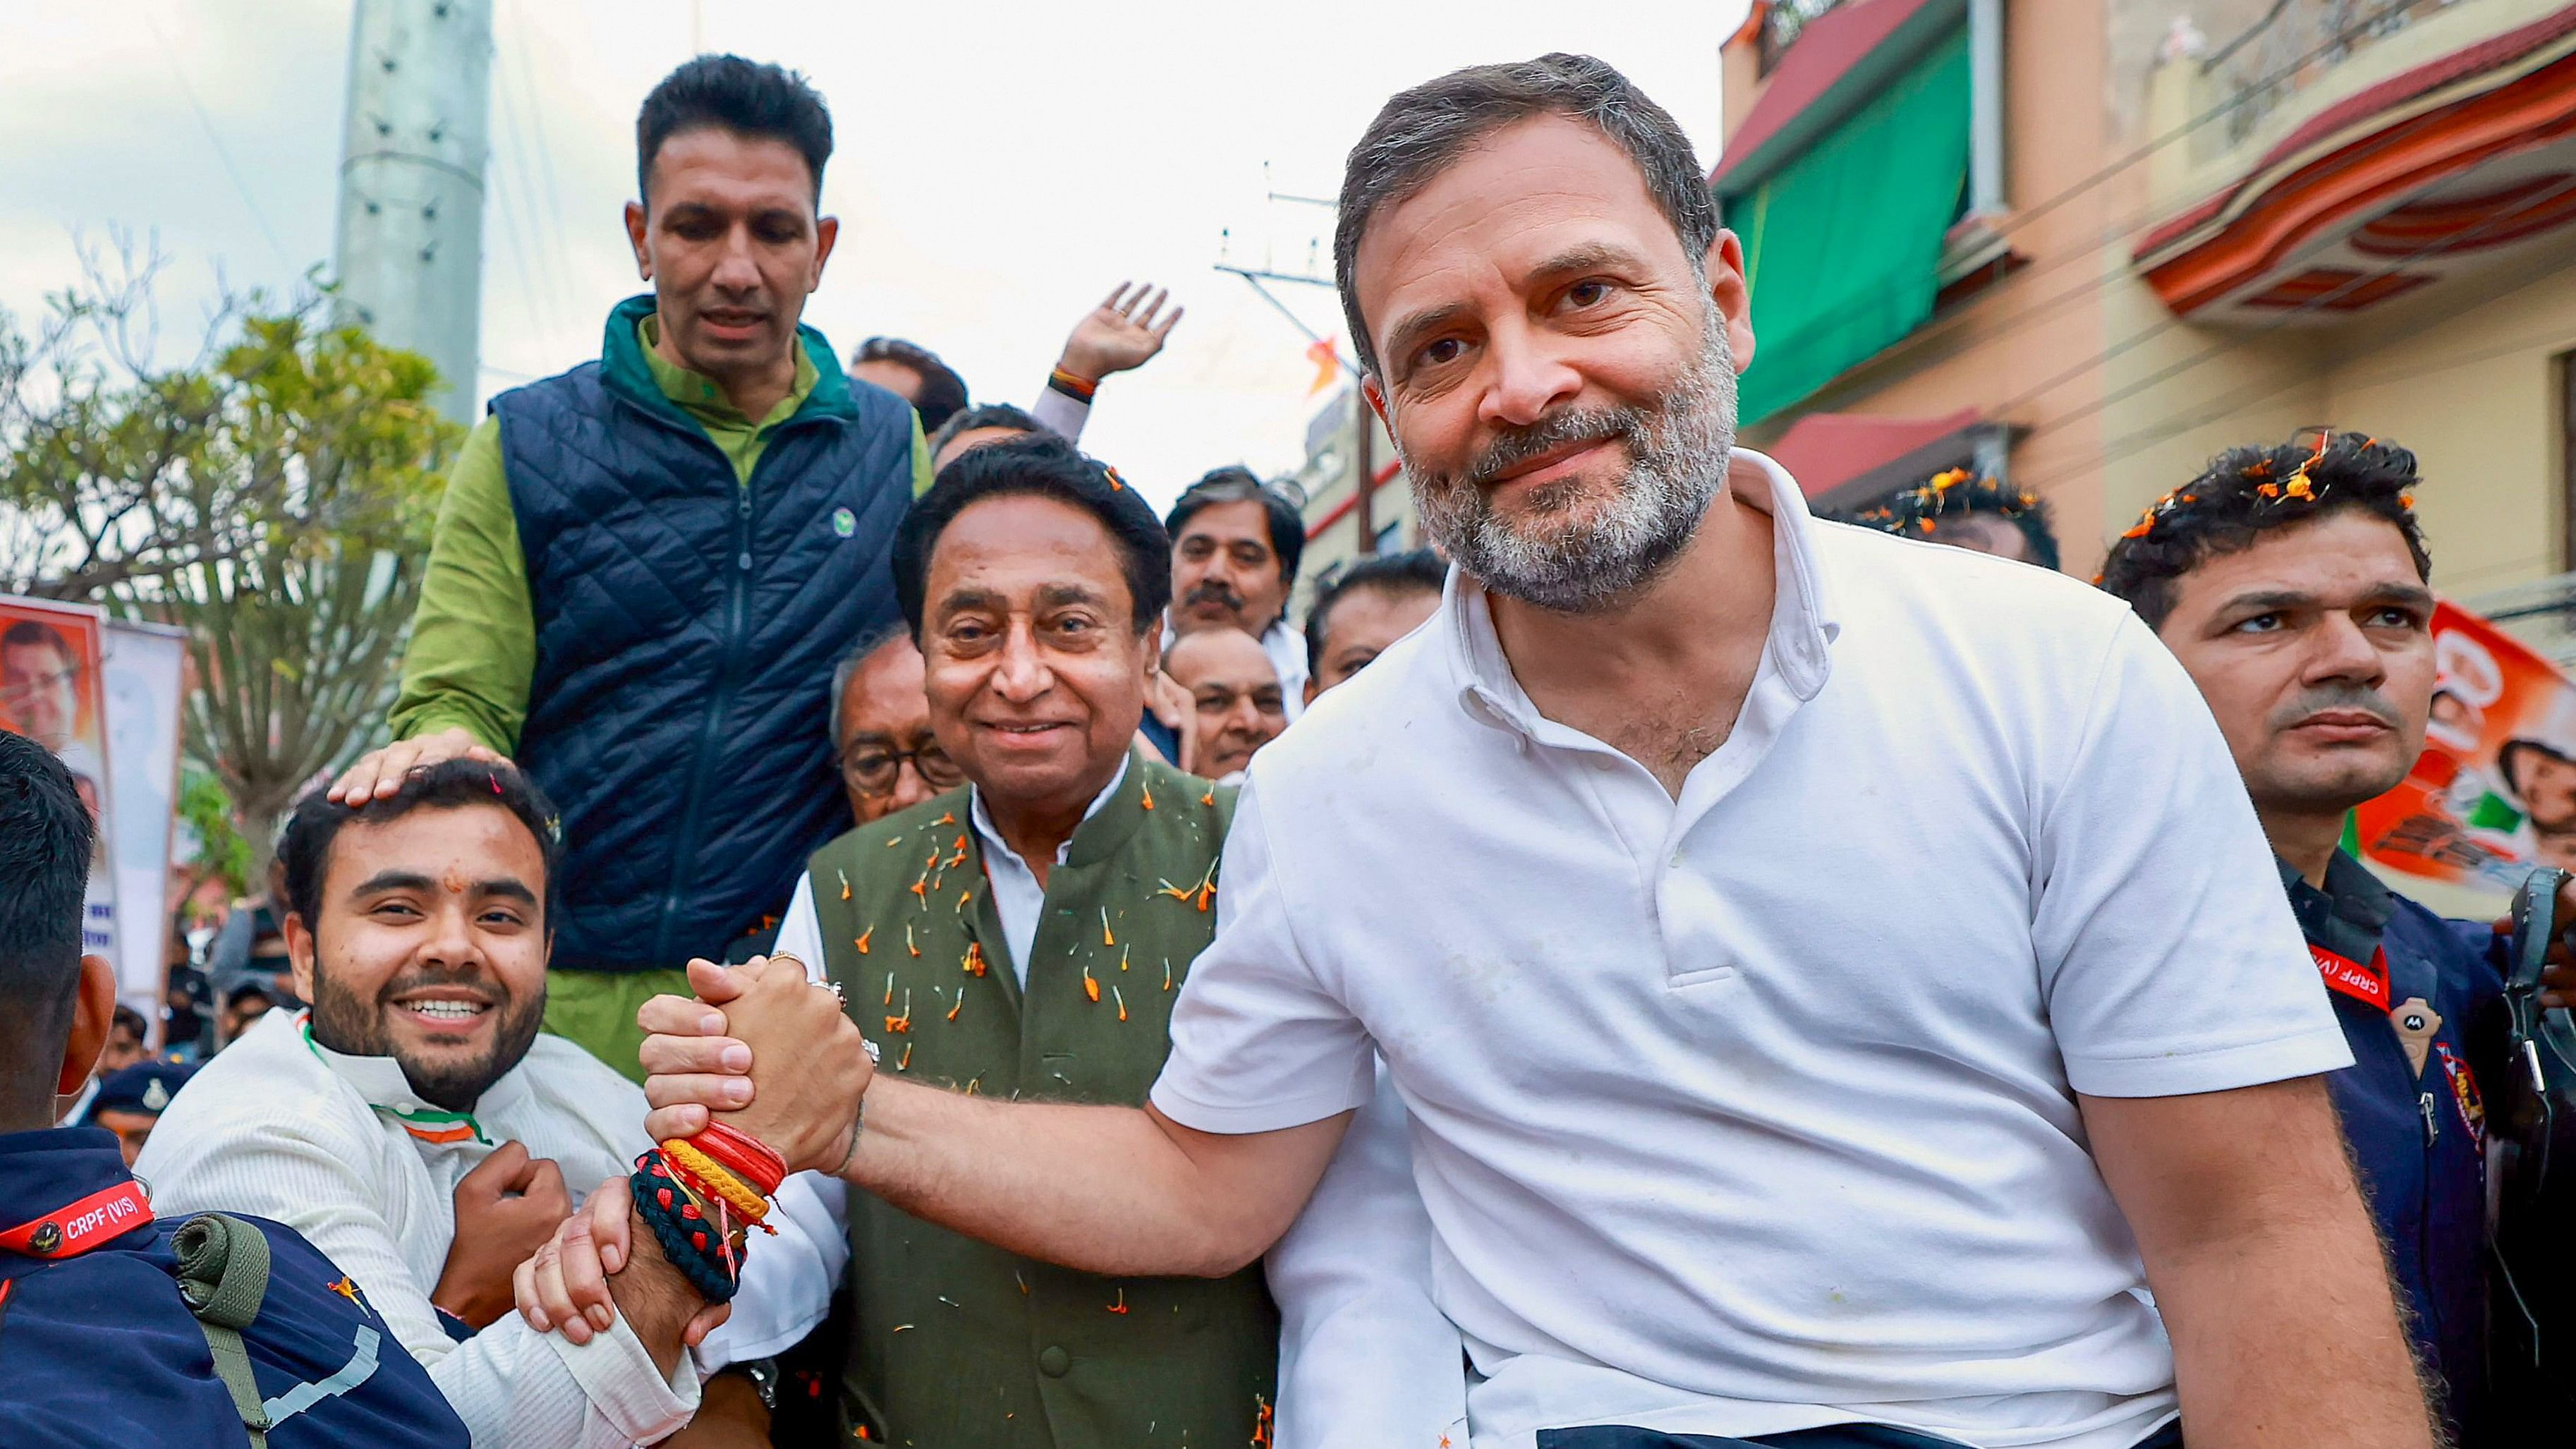 <div class="paragraphs"><p>Congress leader Rahul Gandhi with Madhya Pradesh state party President Jitendra Patwari, party leader Kamal Nath and others greets a supporter at a roadshow during the ‘Bharat Jodo Nyay Yatra’, in Madhya Pradesh, on Saturday.</p></div>